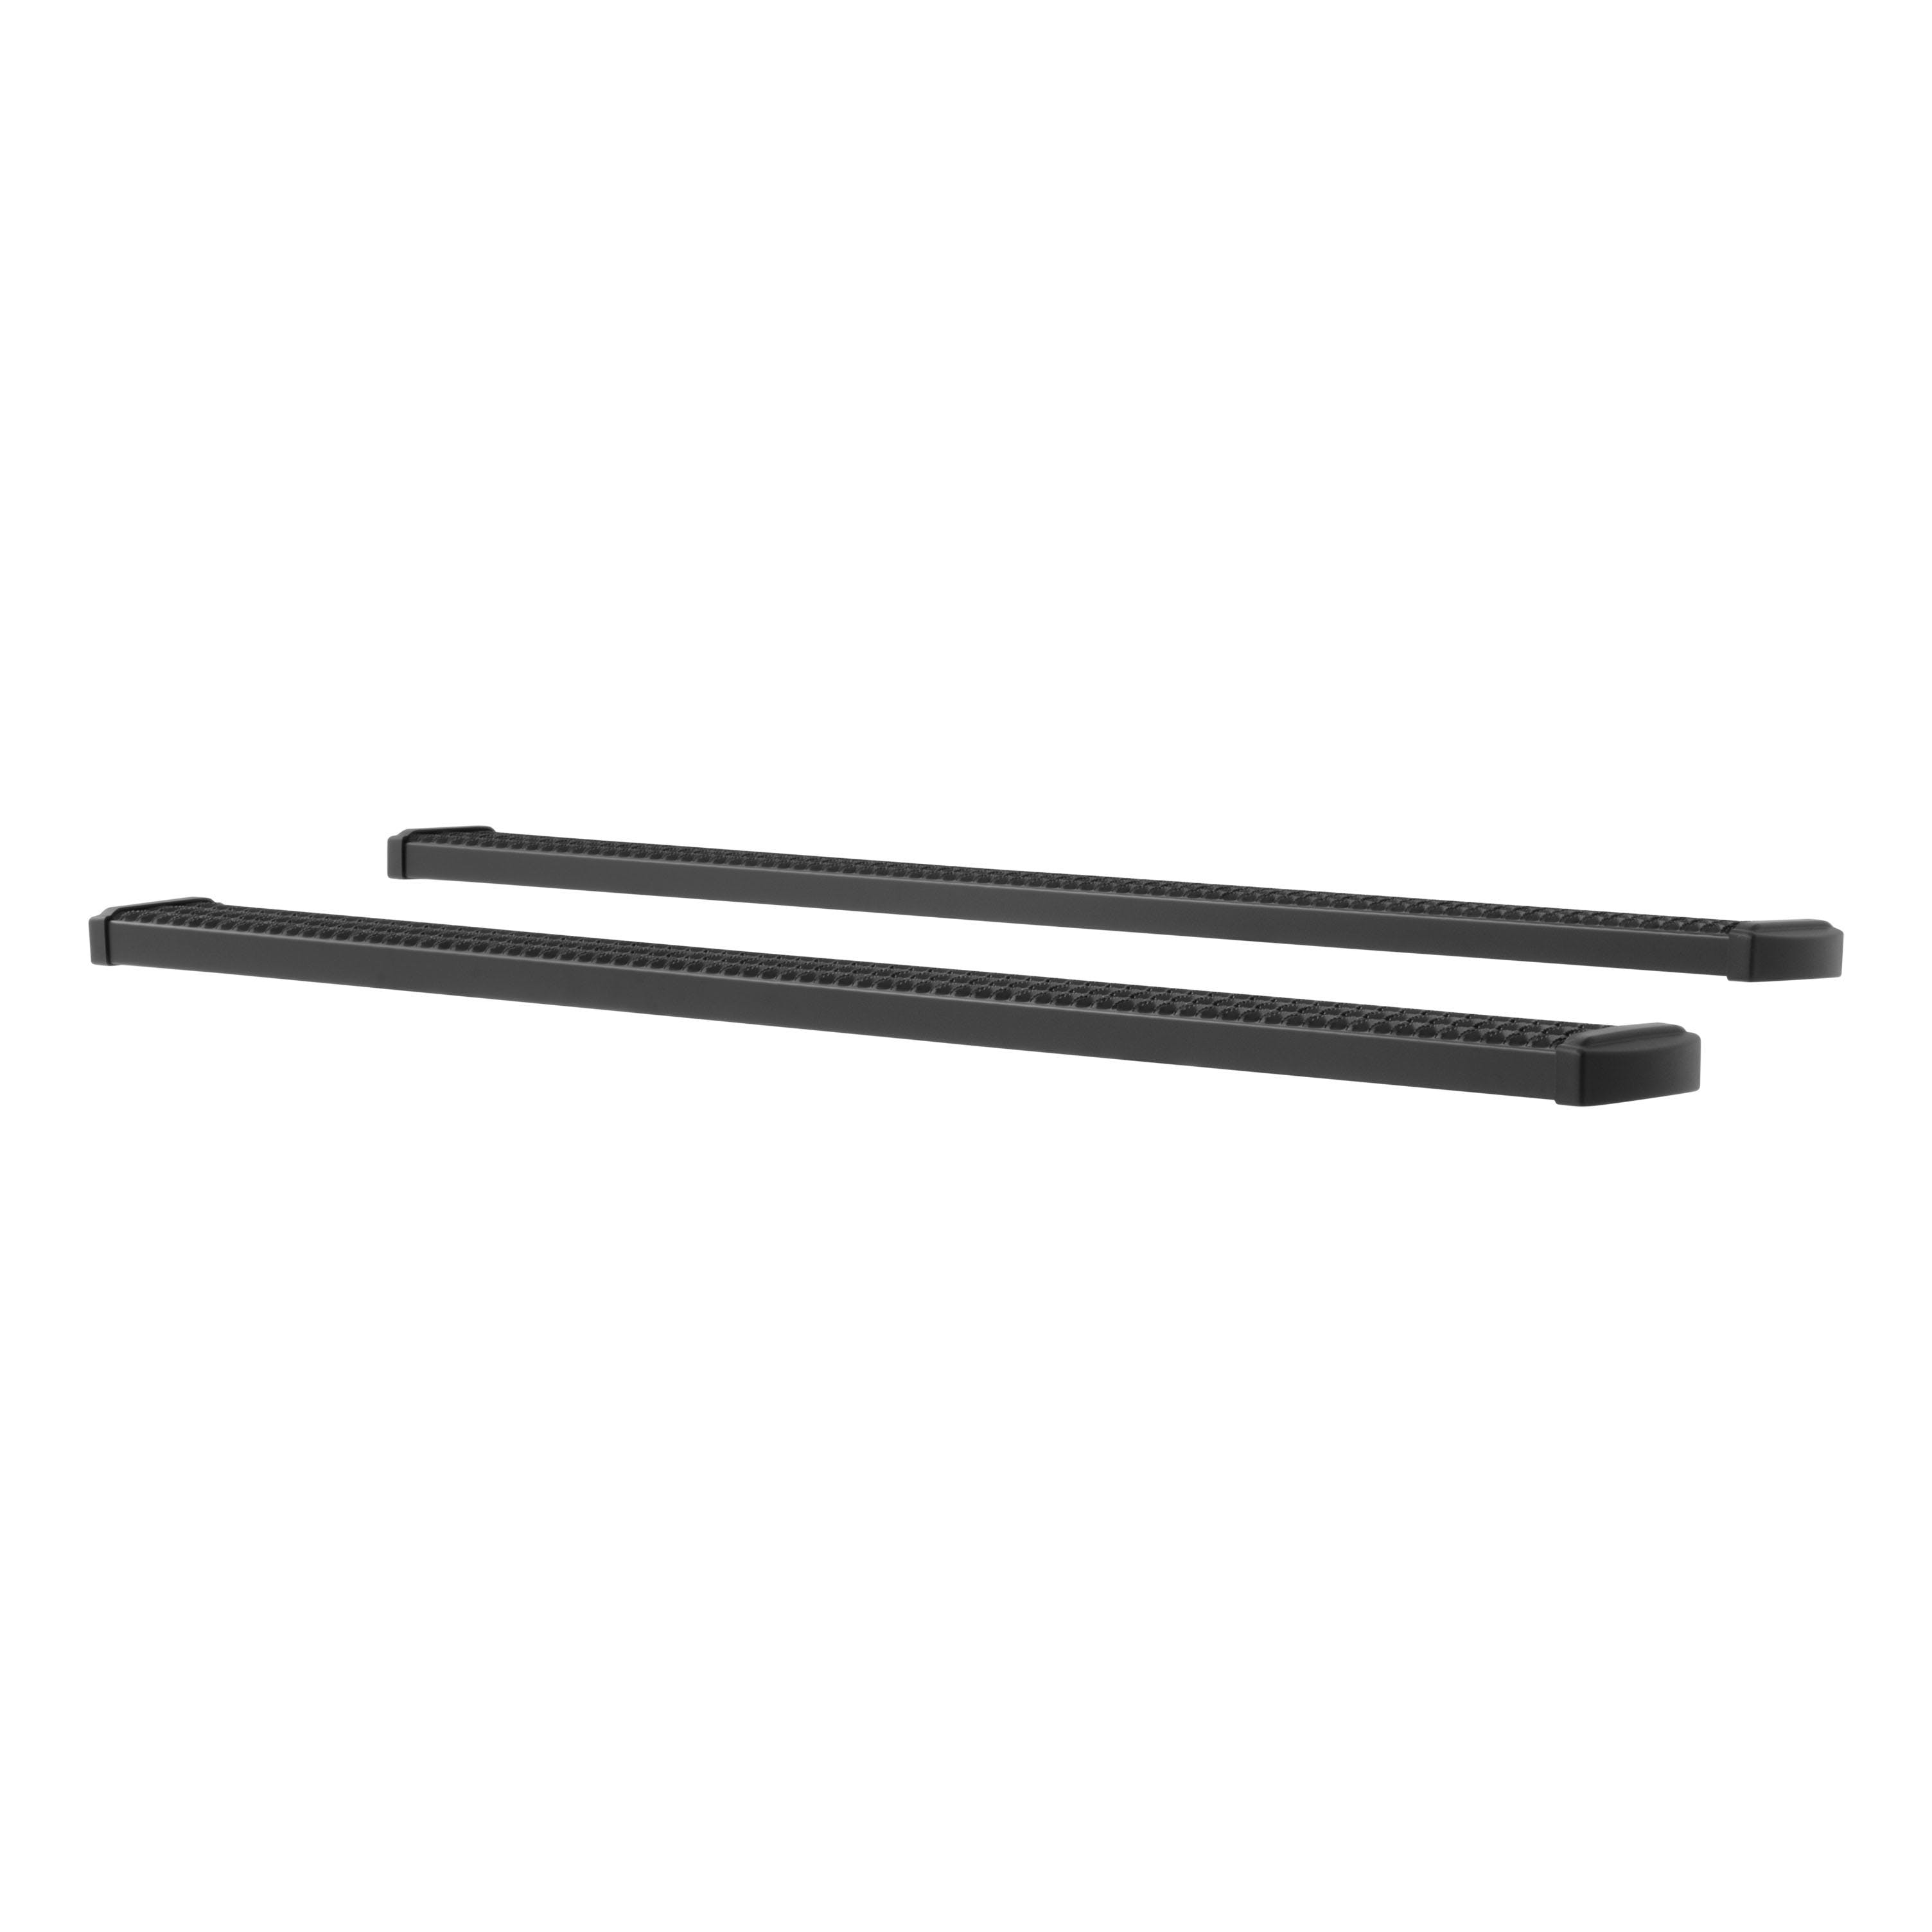 LUVERNE 415088-400713 Grip Step 7 inch Running Boards